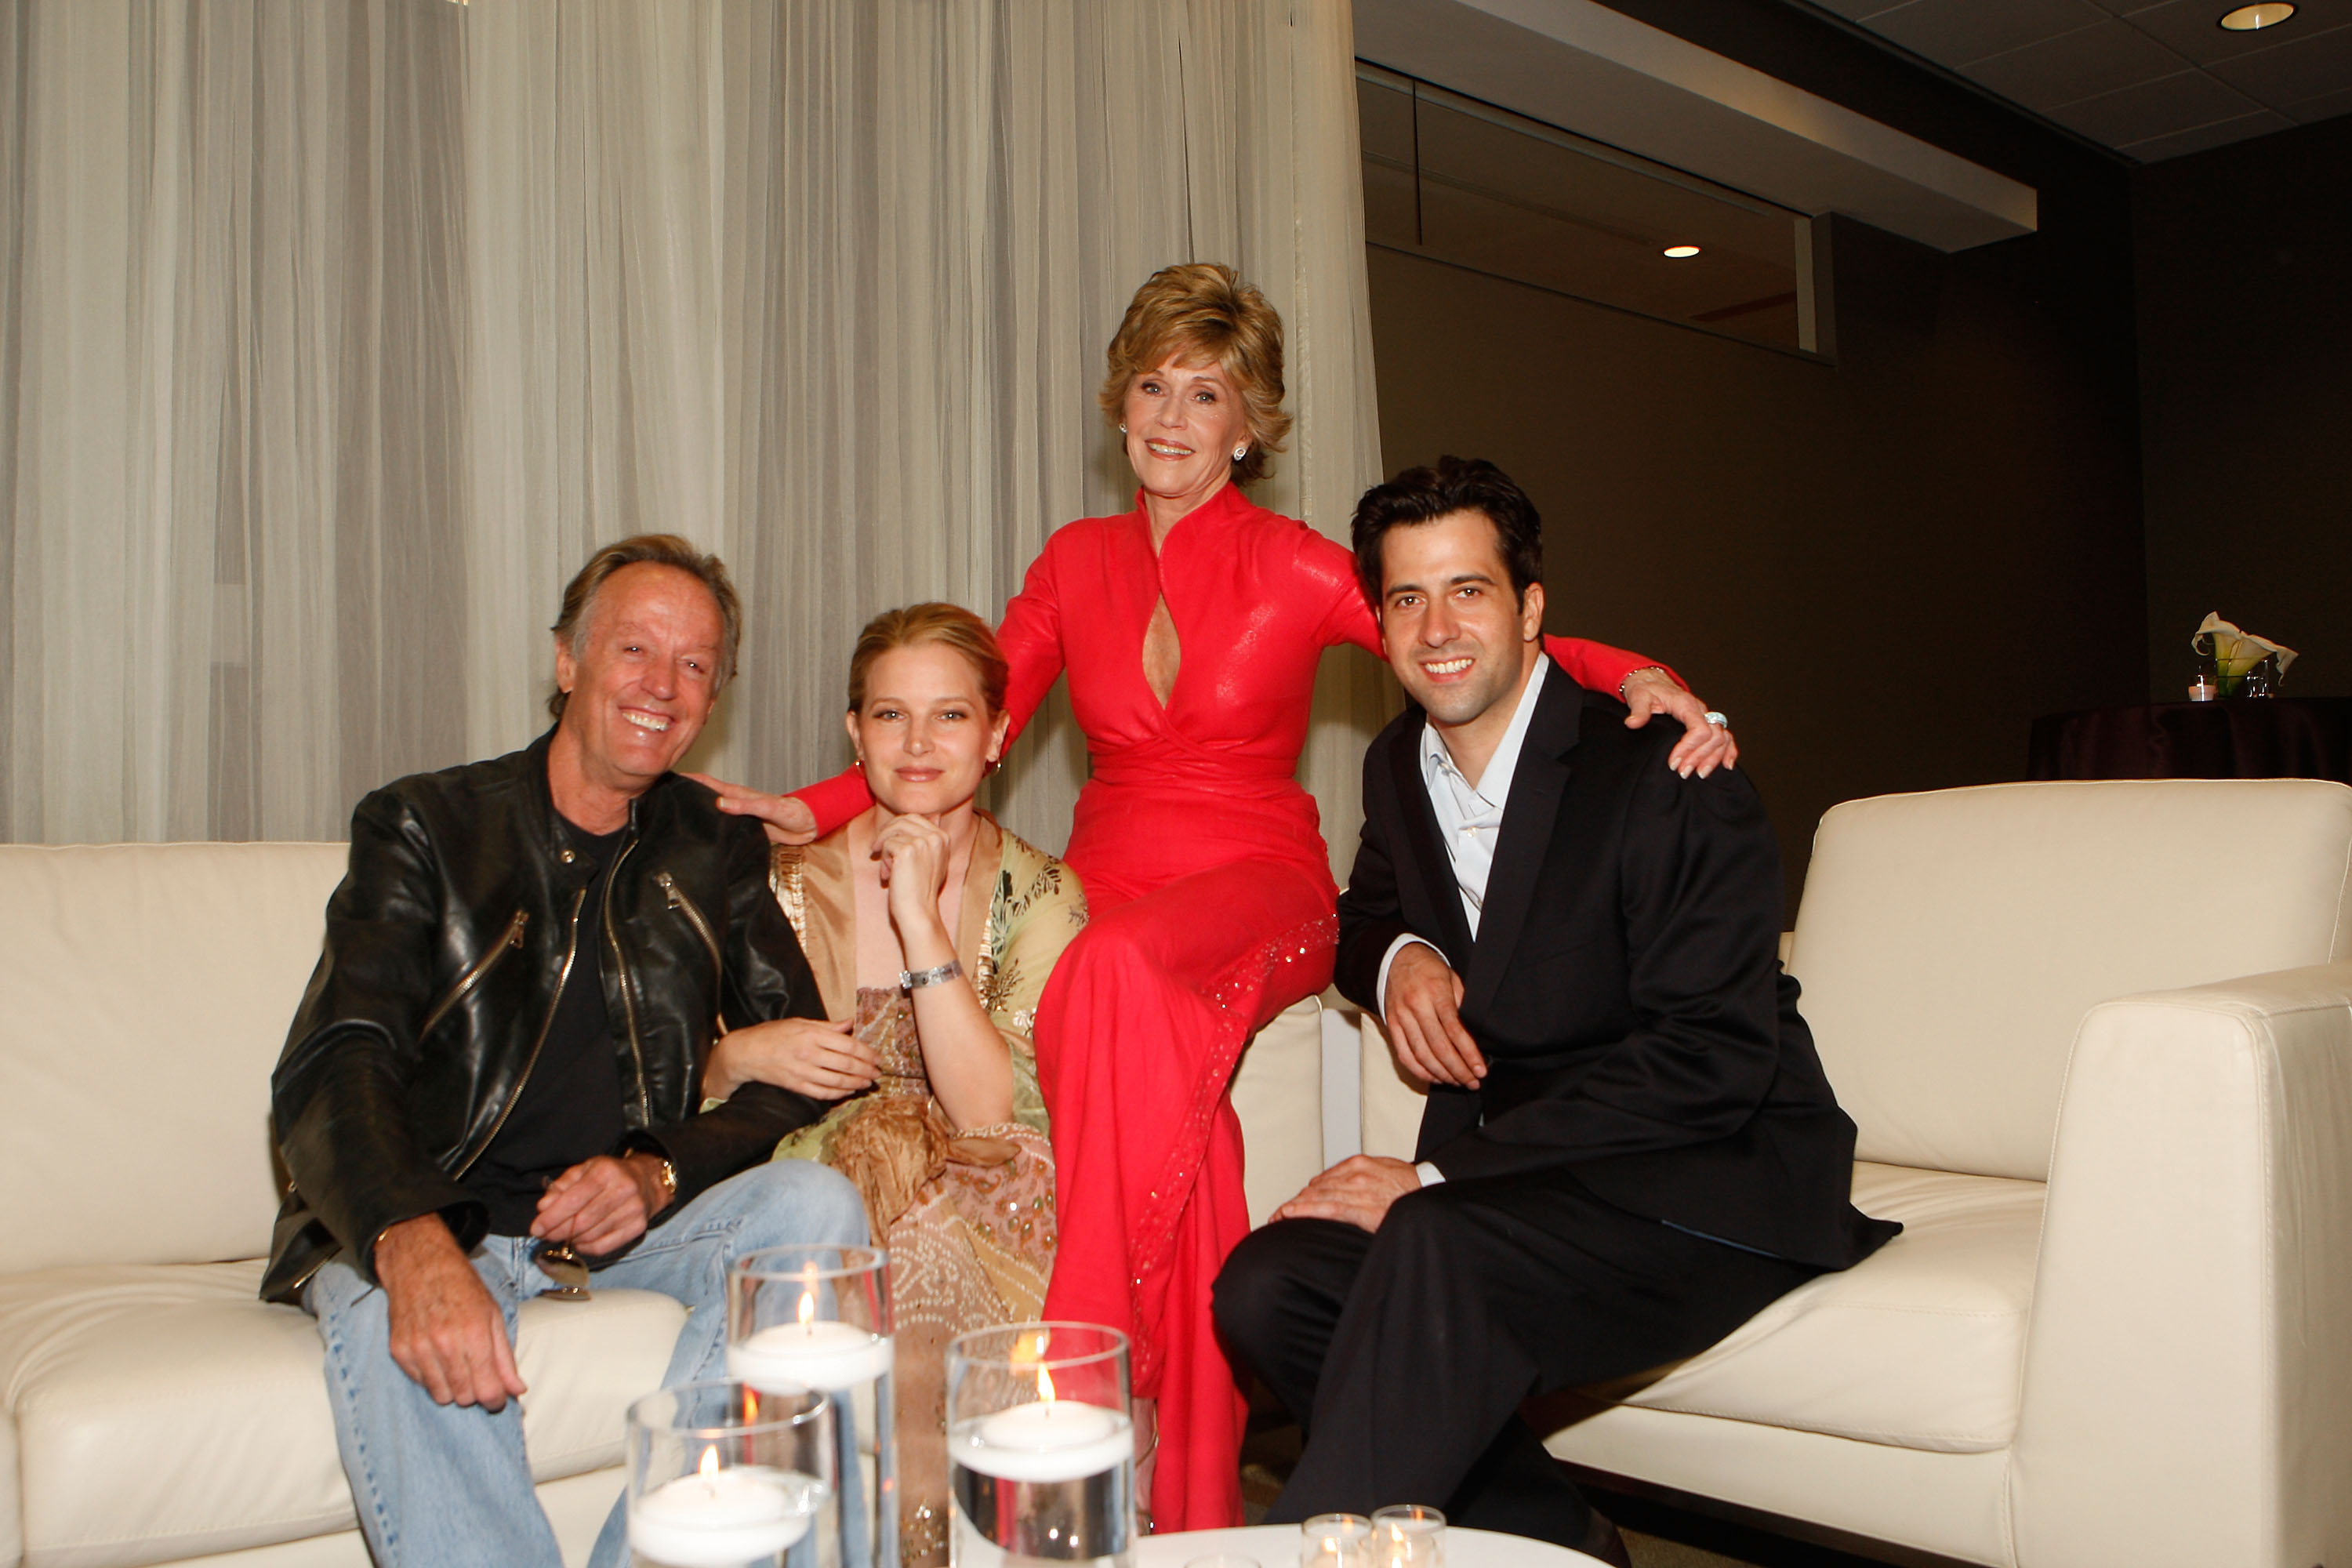 Peter, Bridget and Jane Fonda with Troy Garity at the "Three Generations of Fonda on Film" benefit in 2008 in Atlanta | Source: Getty Images